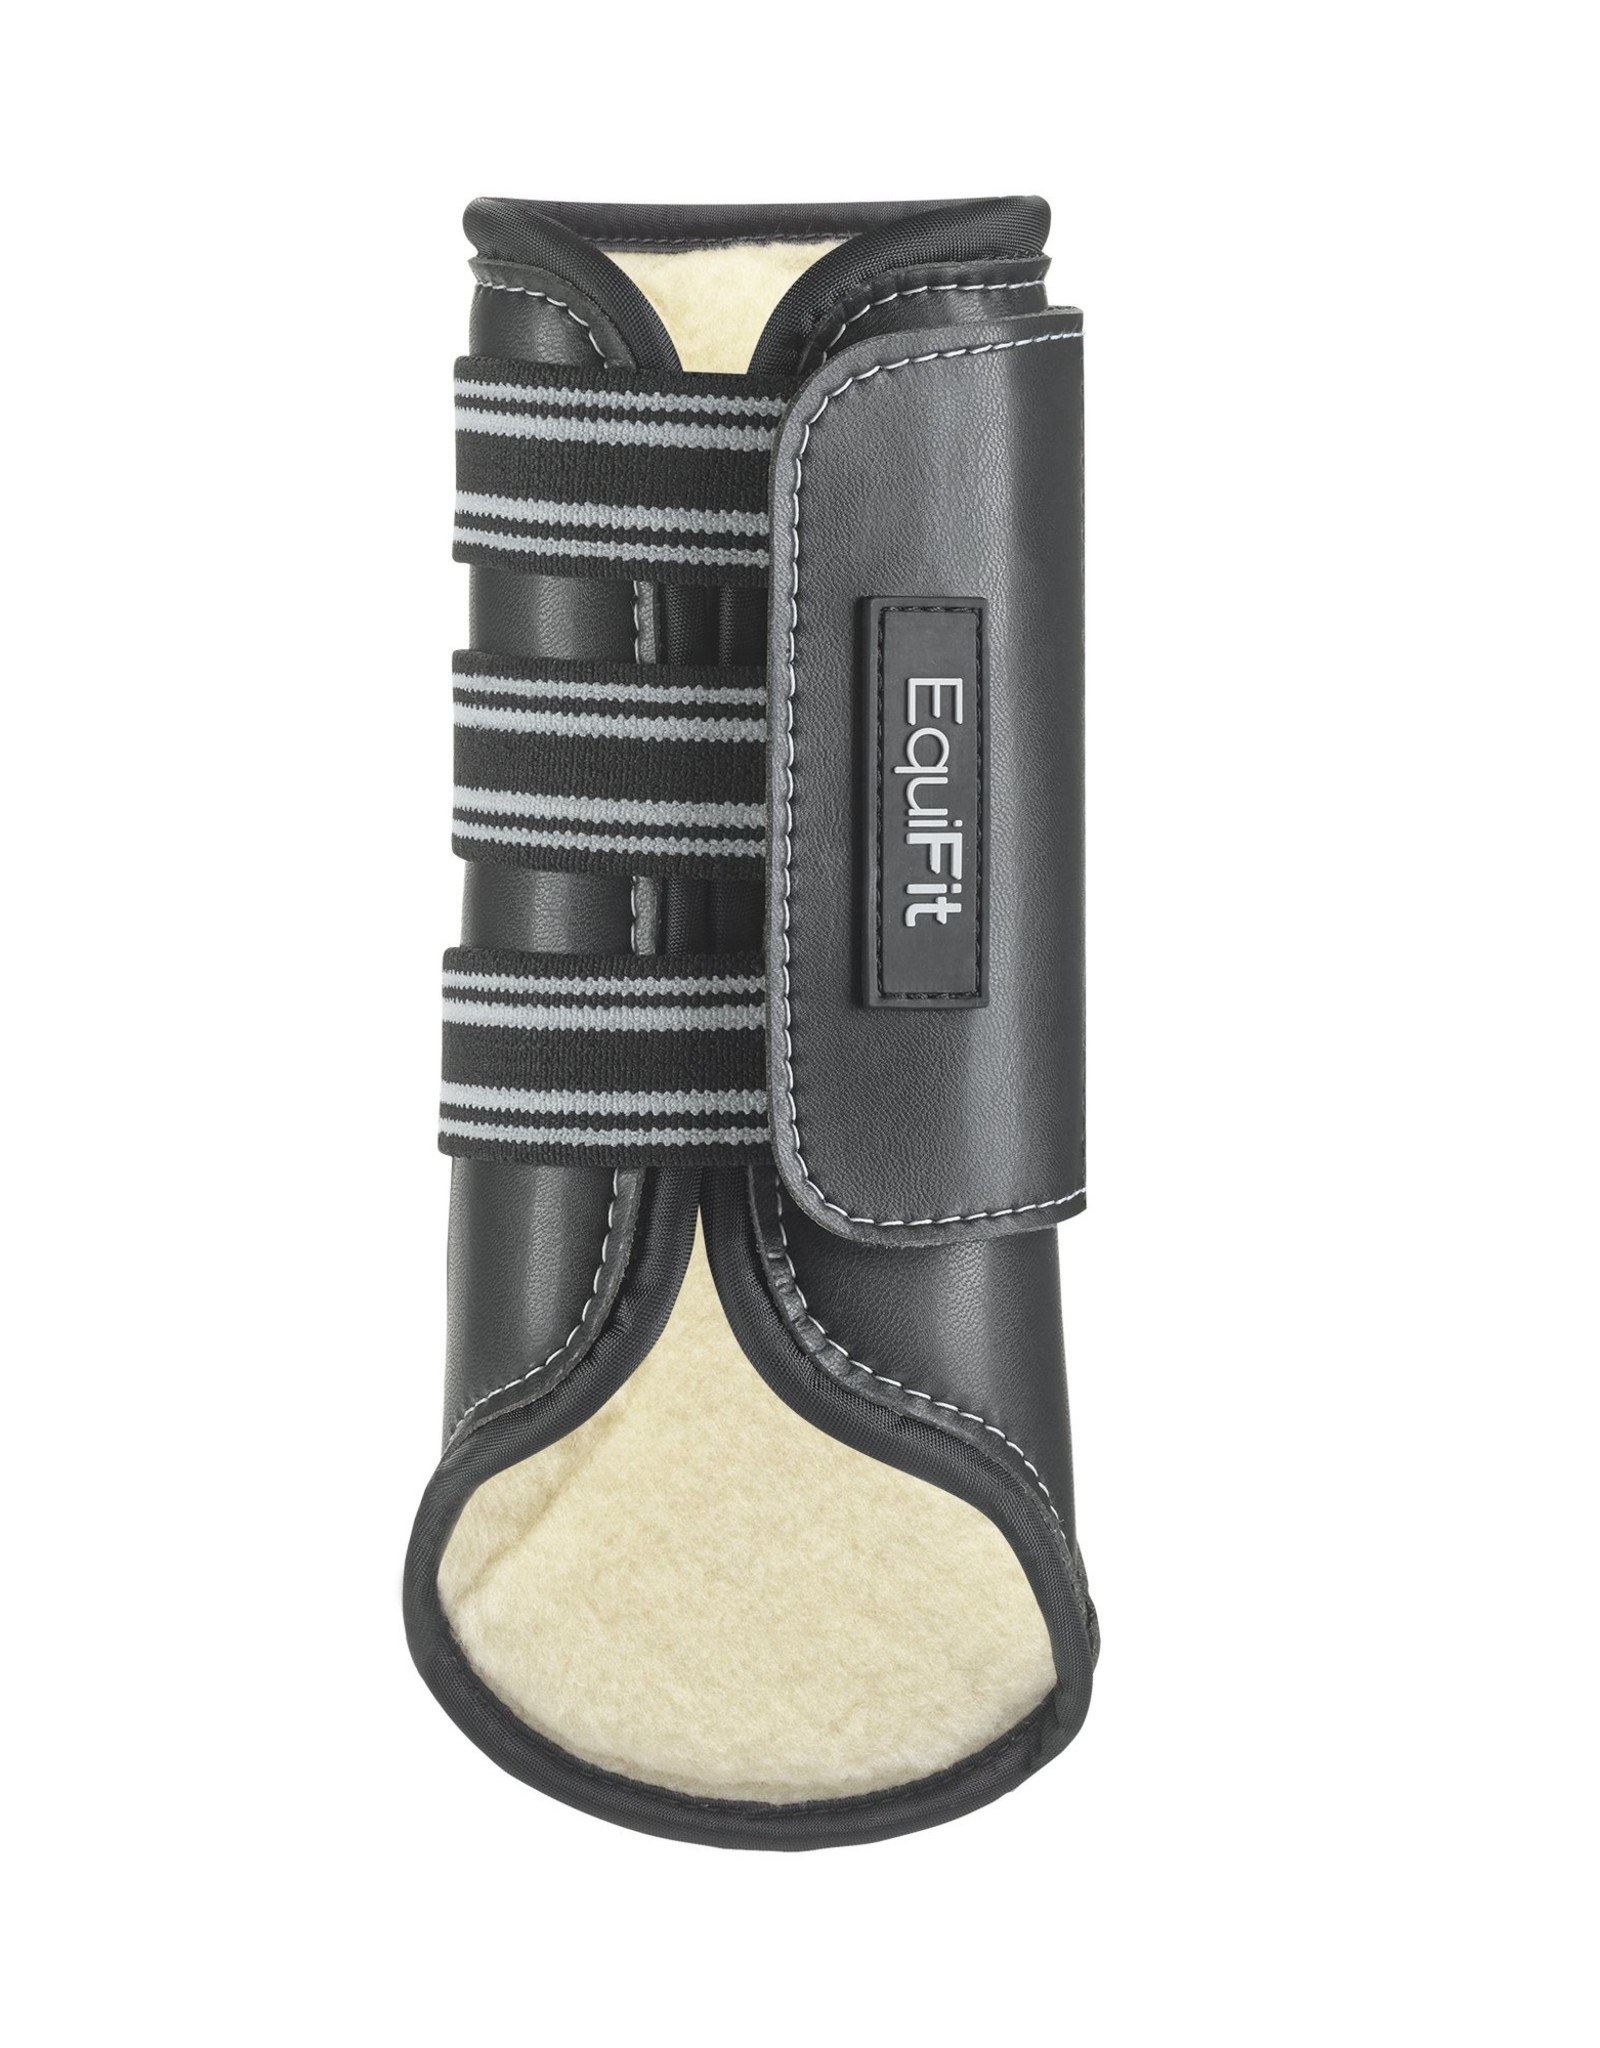 EQUIFIT MULTITEQ™ FRONT BOOT (SHEEPSWOOL)